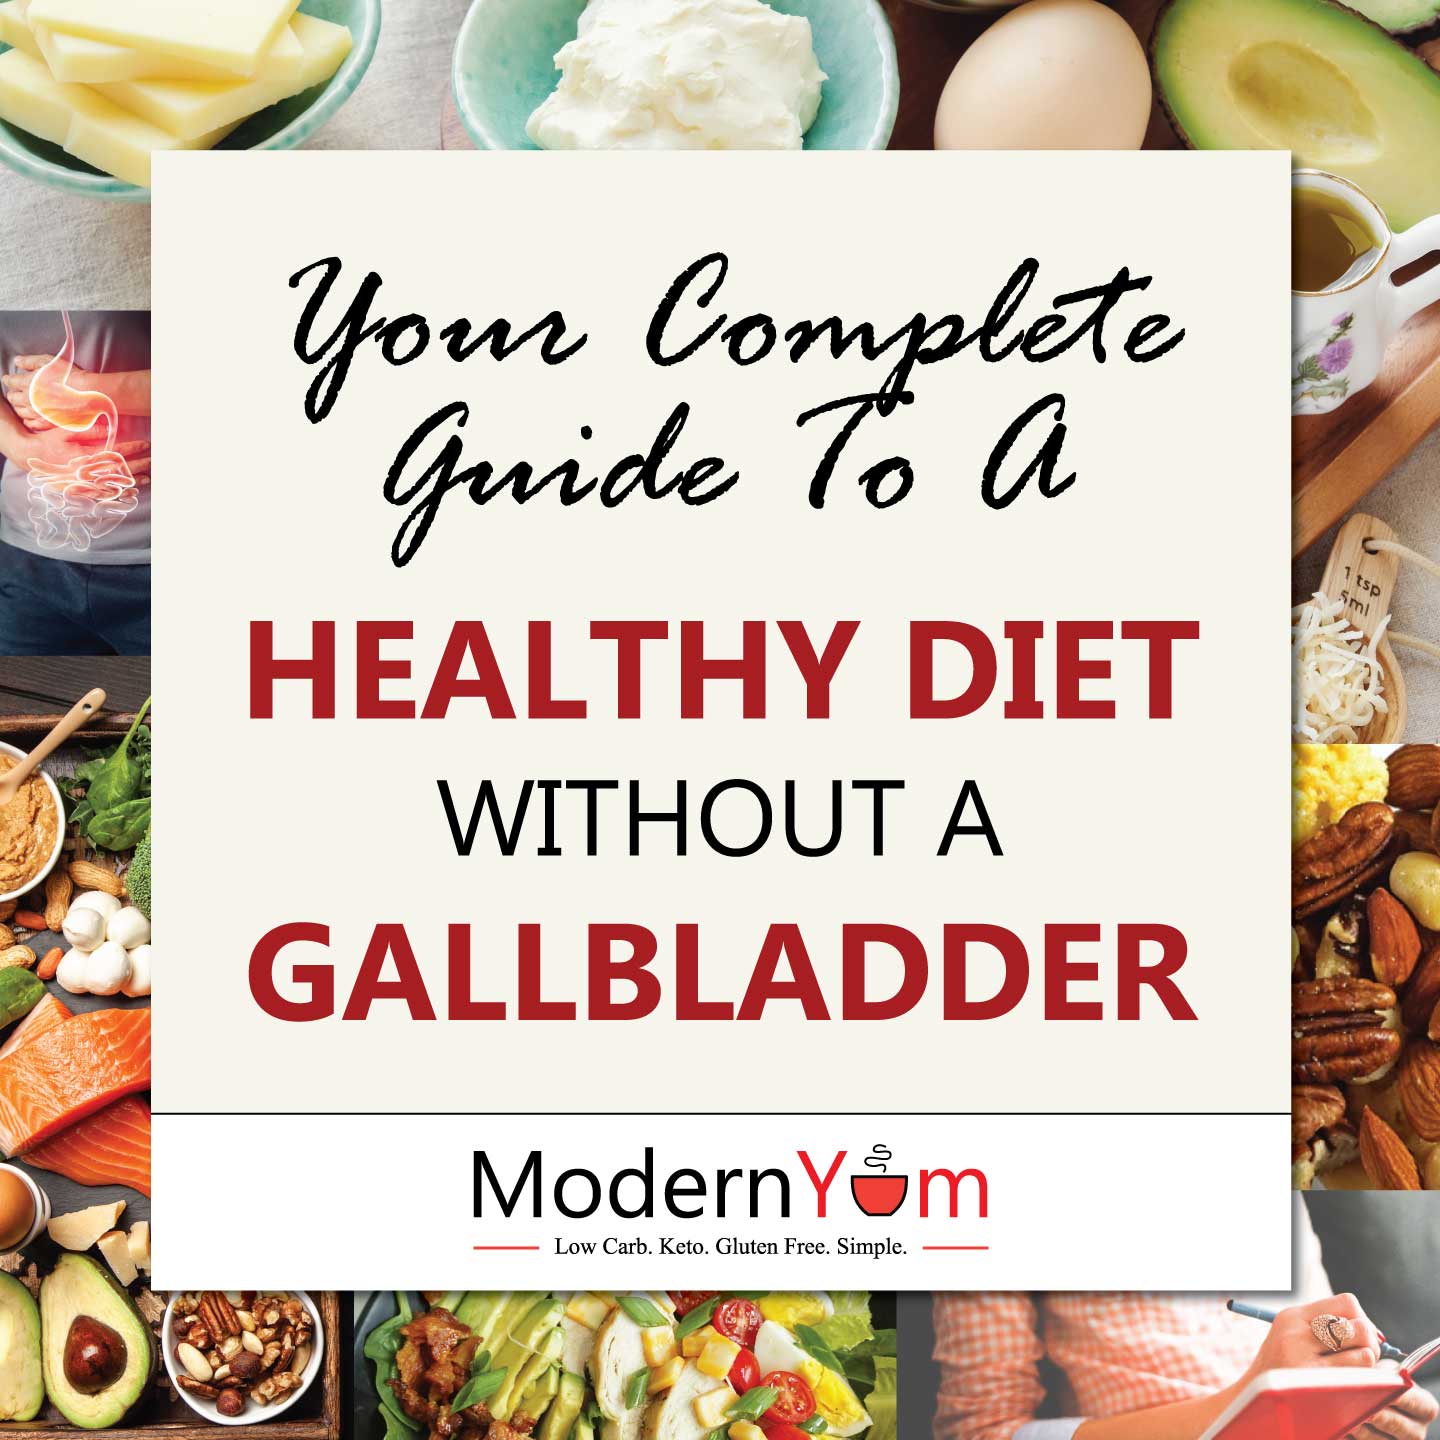 Your Complete Guide to a Healthy Diet Without a Gallbladder.